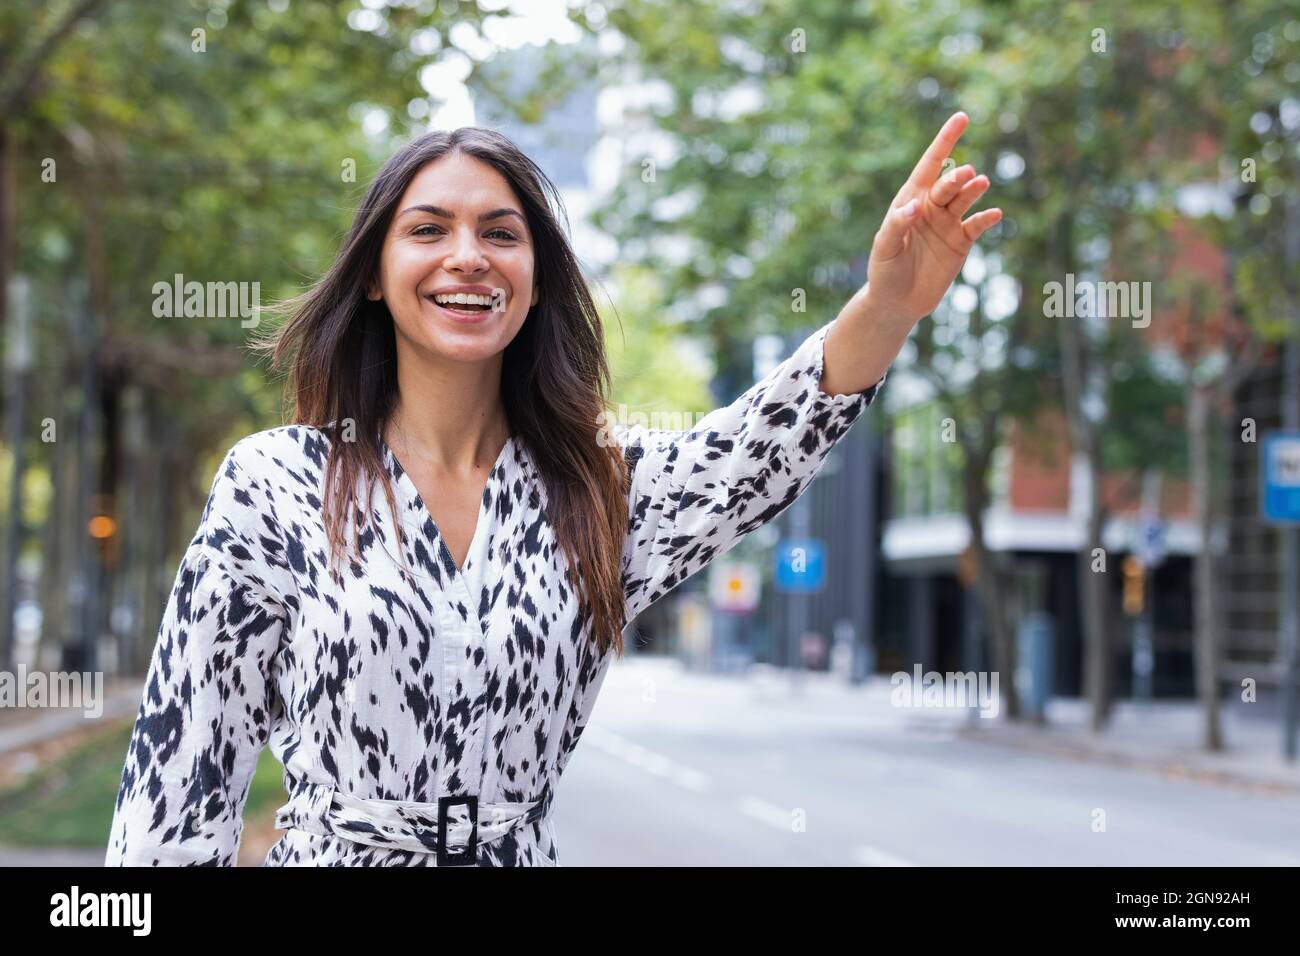 Smiling beautiful young female tourist hailing ride on road Stock Photo